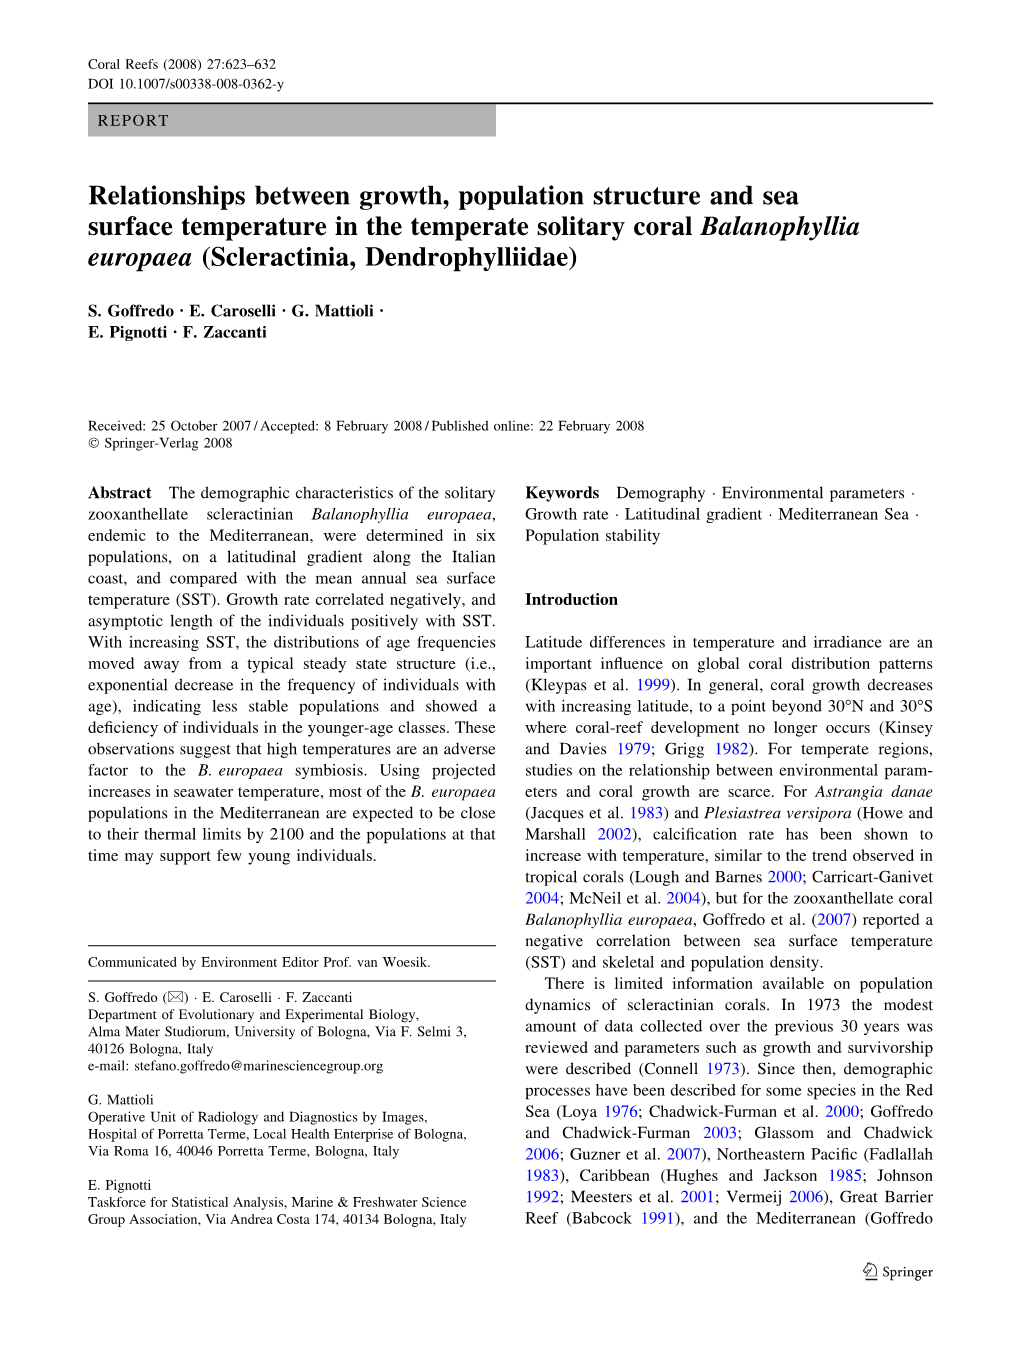 Relationships Between Growth, Population Structure and Sea Surface Temperature in the Temperate Solitary Coral Balanophyllia Europaea (Scleractinia, Dendrophylliidae)